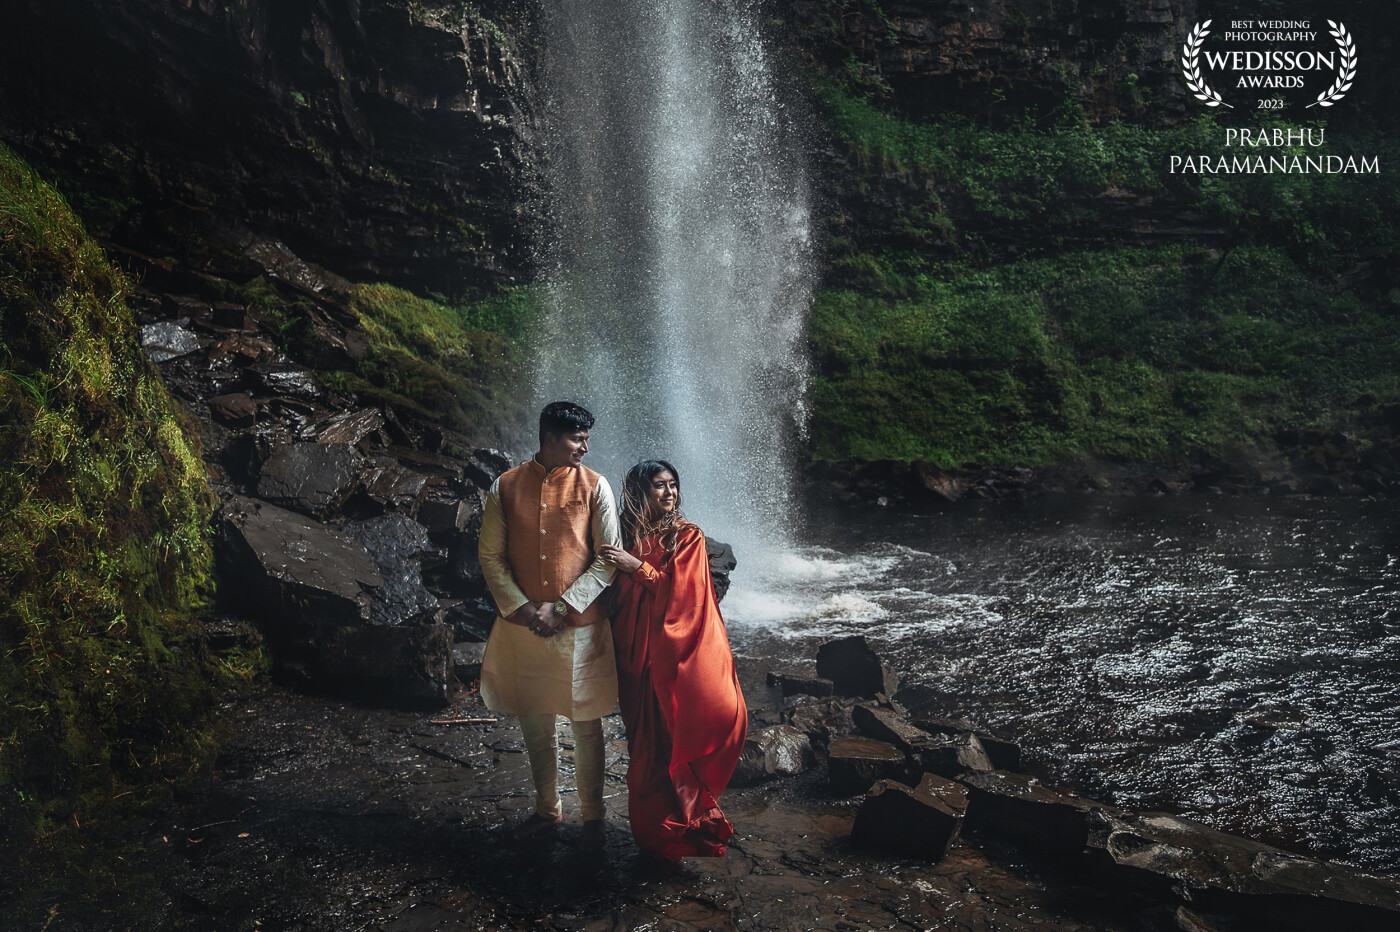 Set against this majestic waterfall cascading in style. The gusty wind, water drizzling, the frame was a stunner by itself. I knew the couple had to be part of this ethereal beauty.